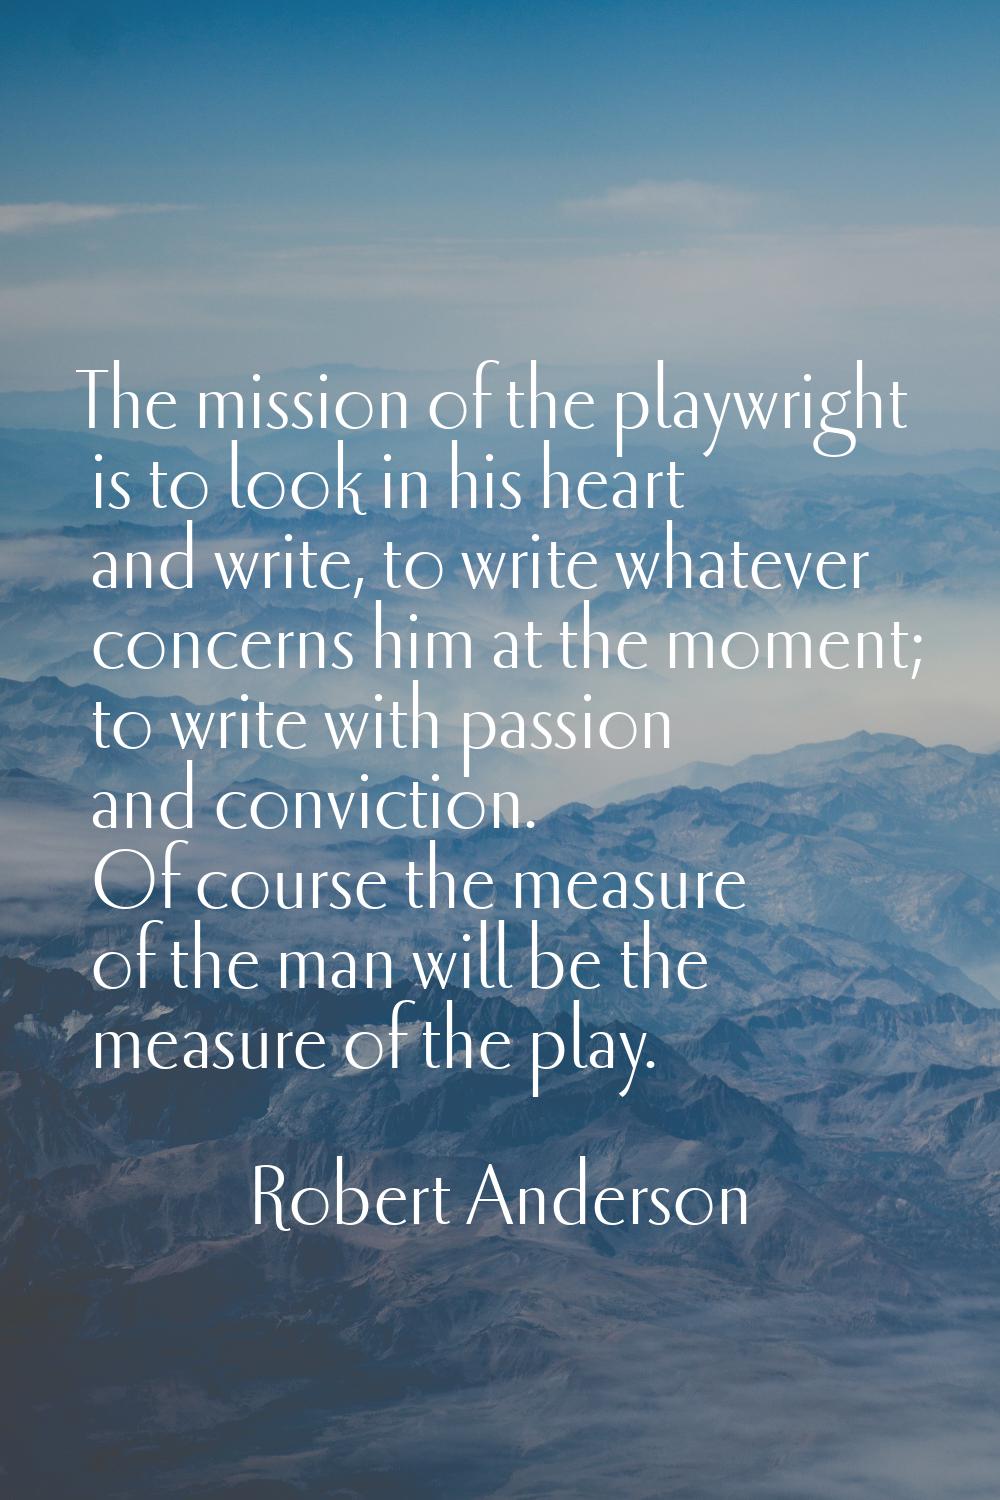 The mission of the playwright is to look in his heart and write, to write whatever concerns him at 